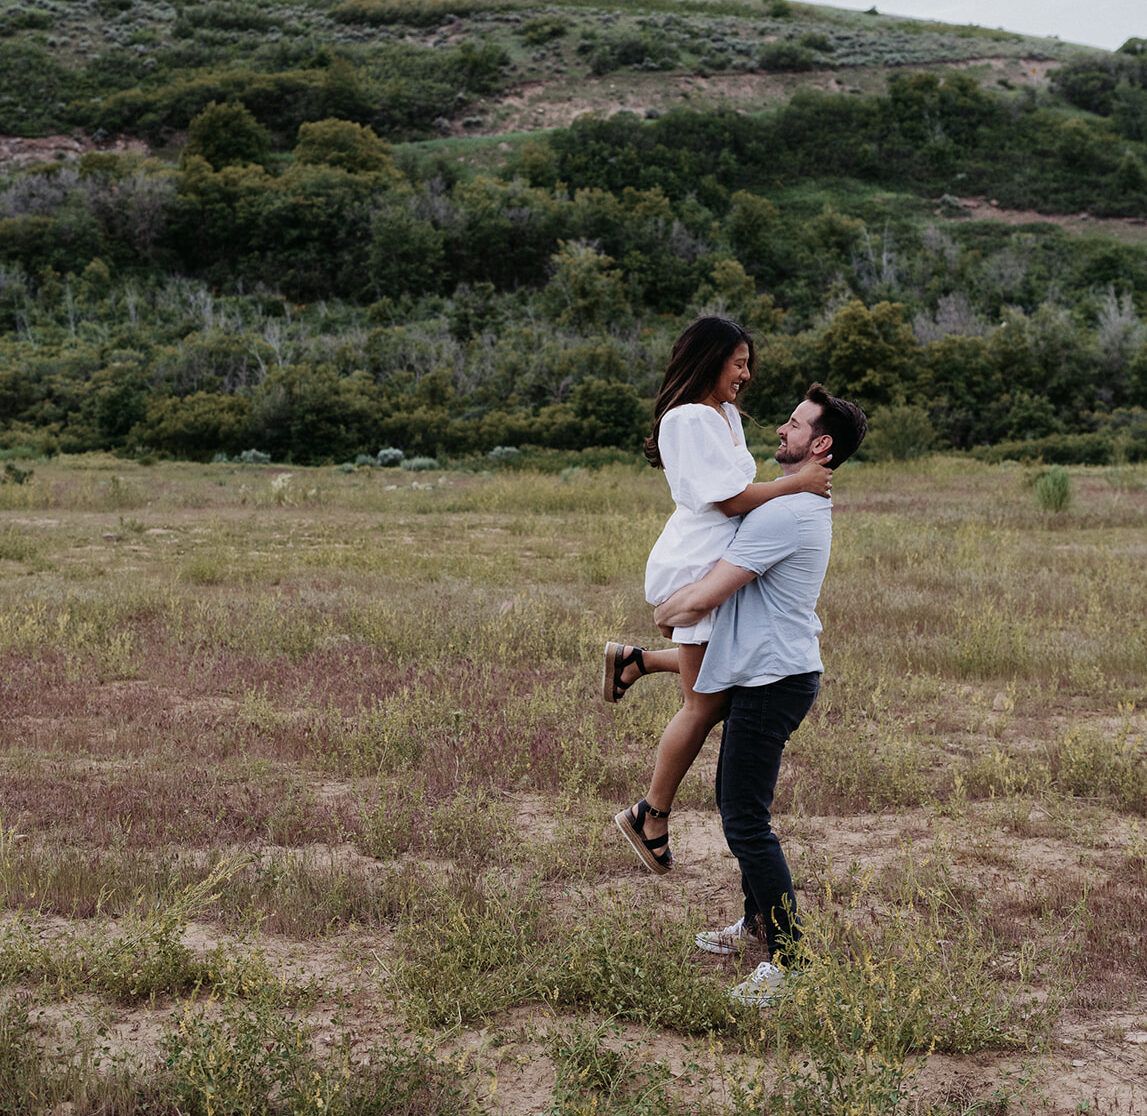 A man lifts his bride while standing in a field by a large hill